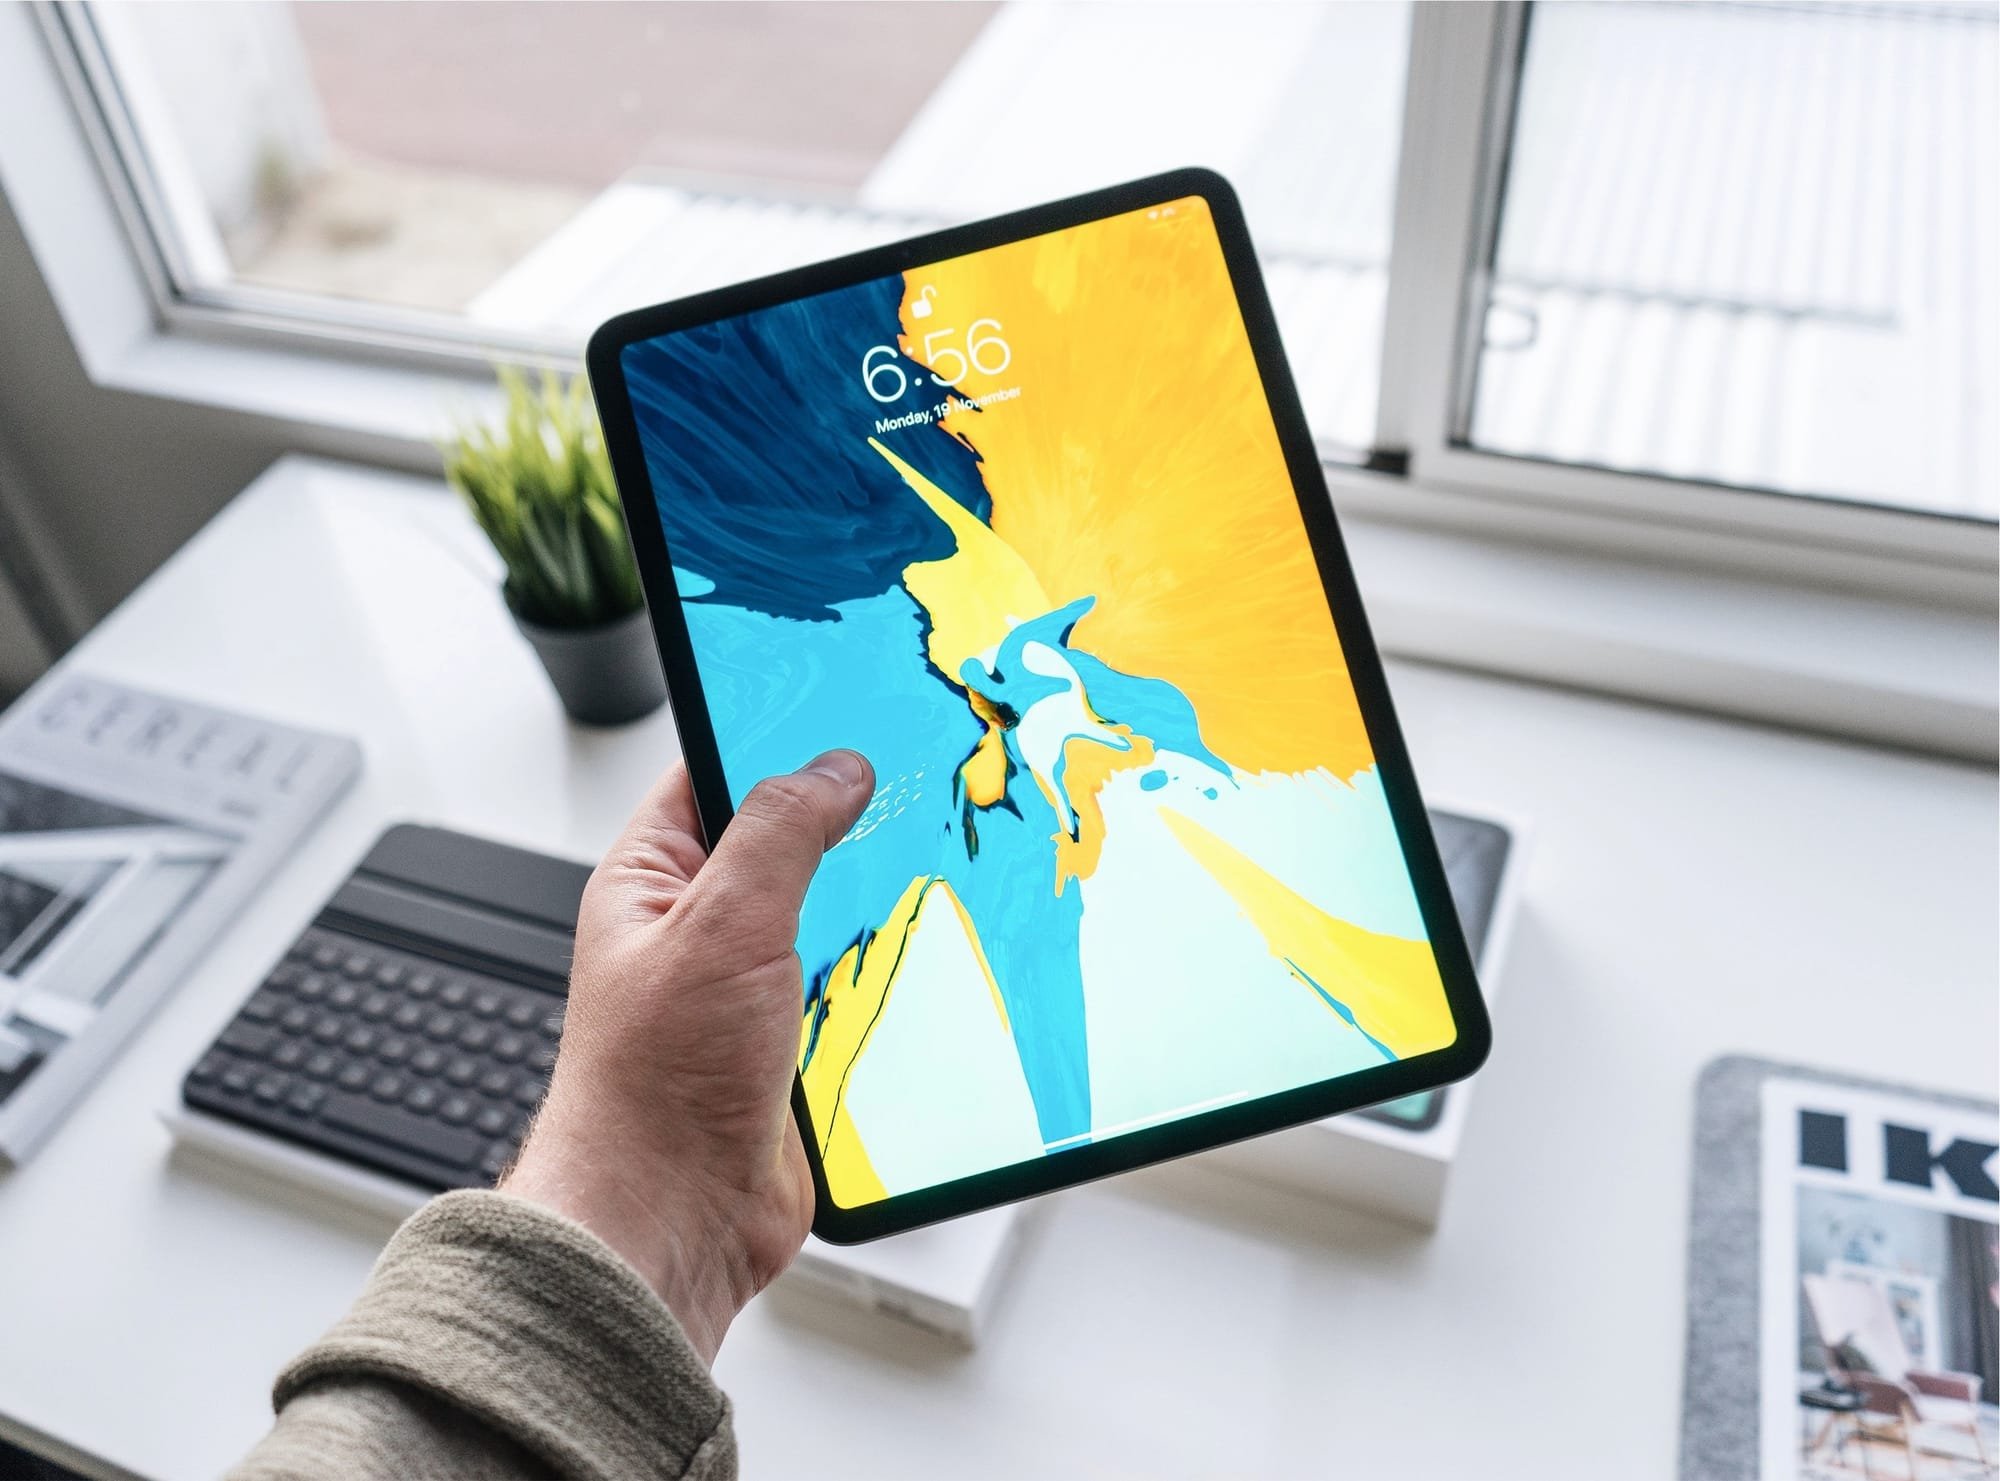 Top 3 Best Tablets of 2020: A Review